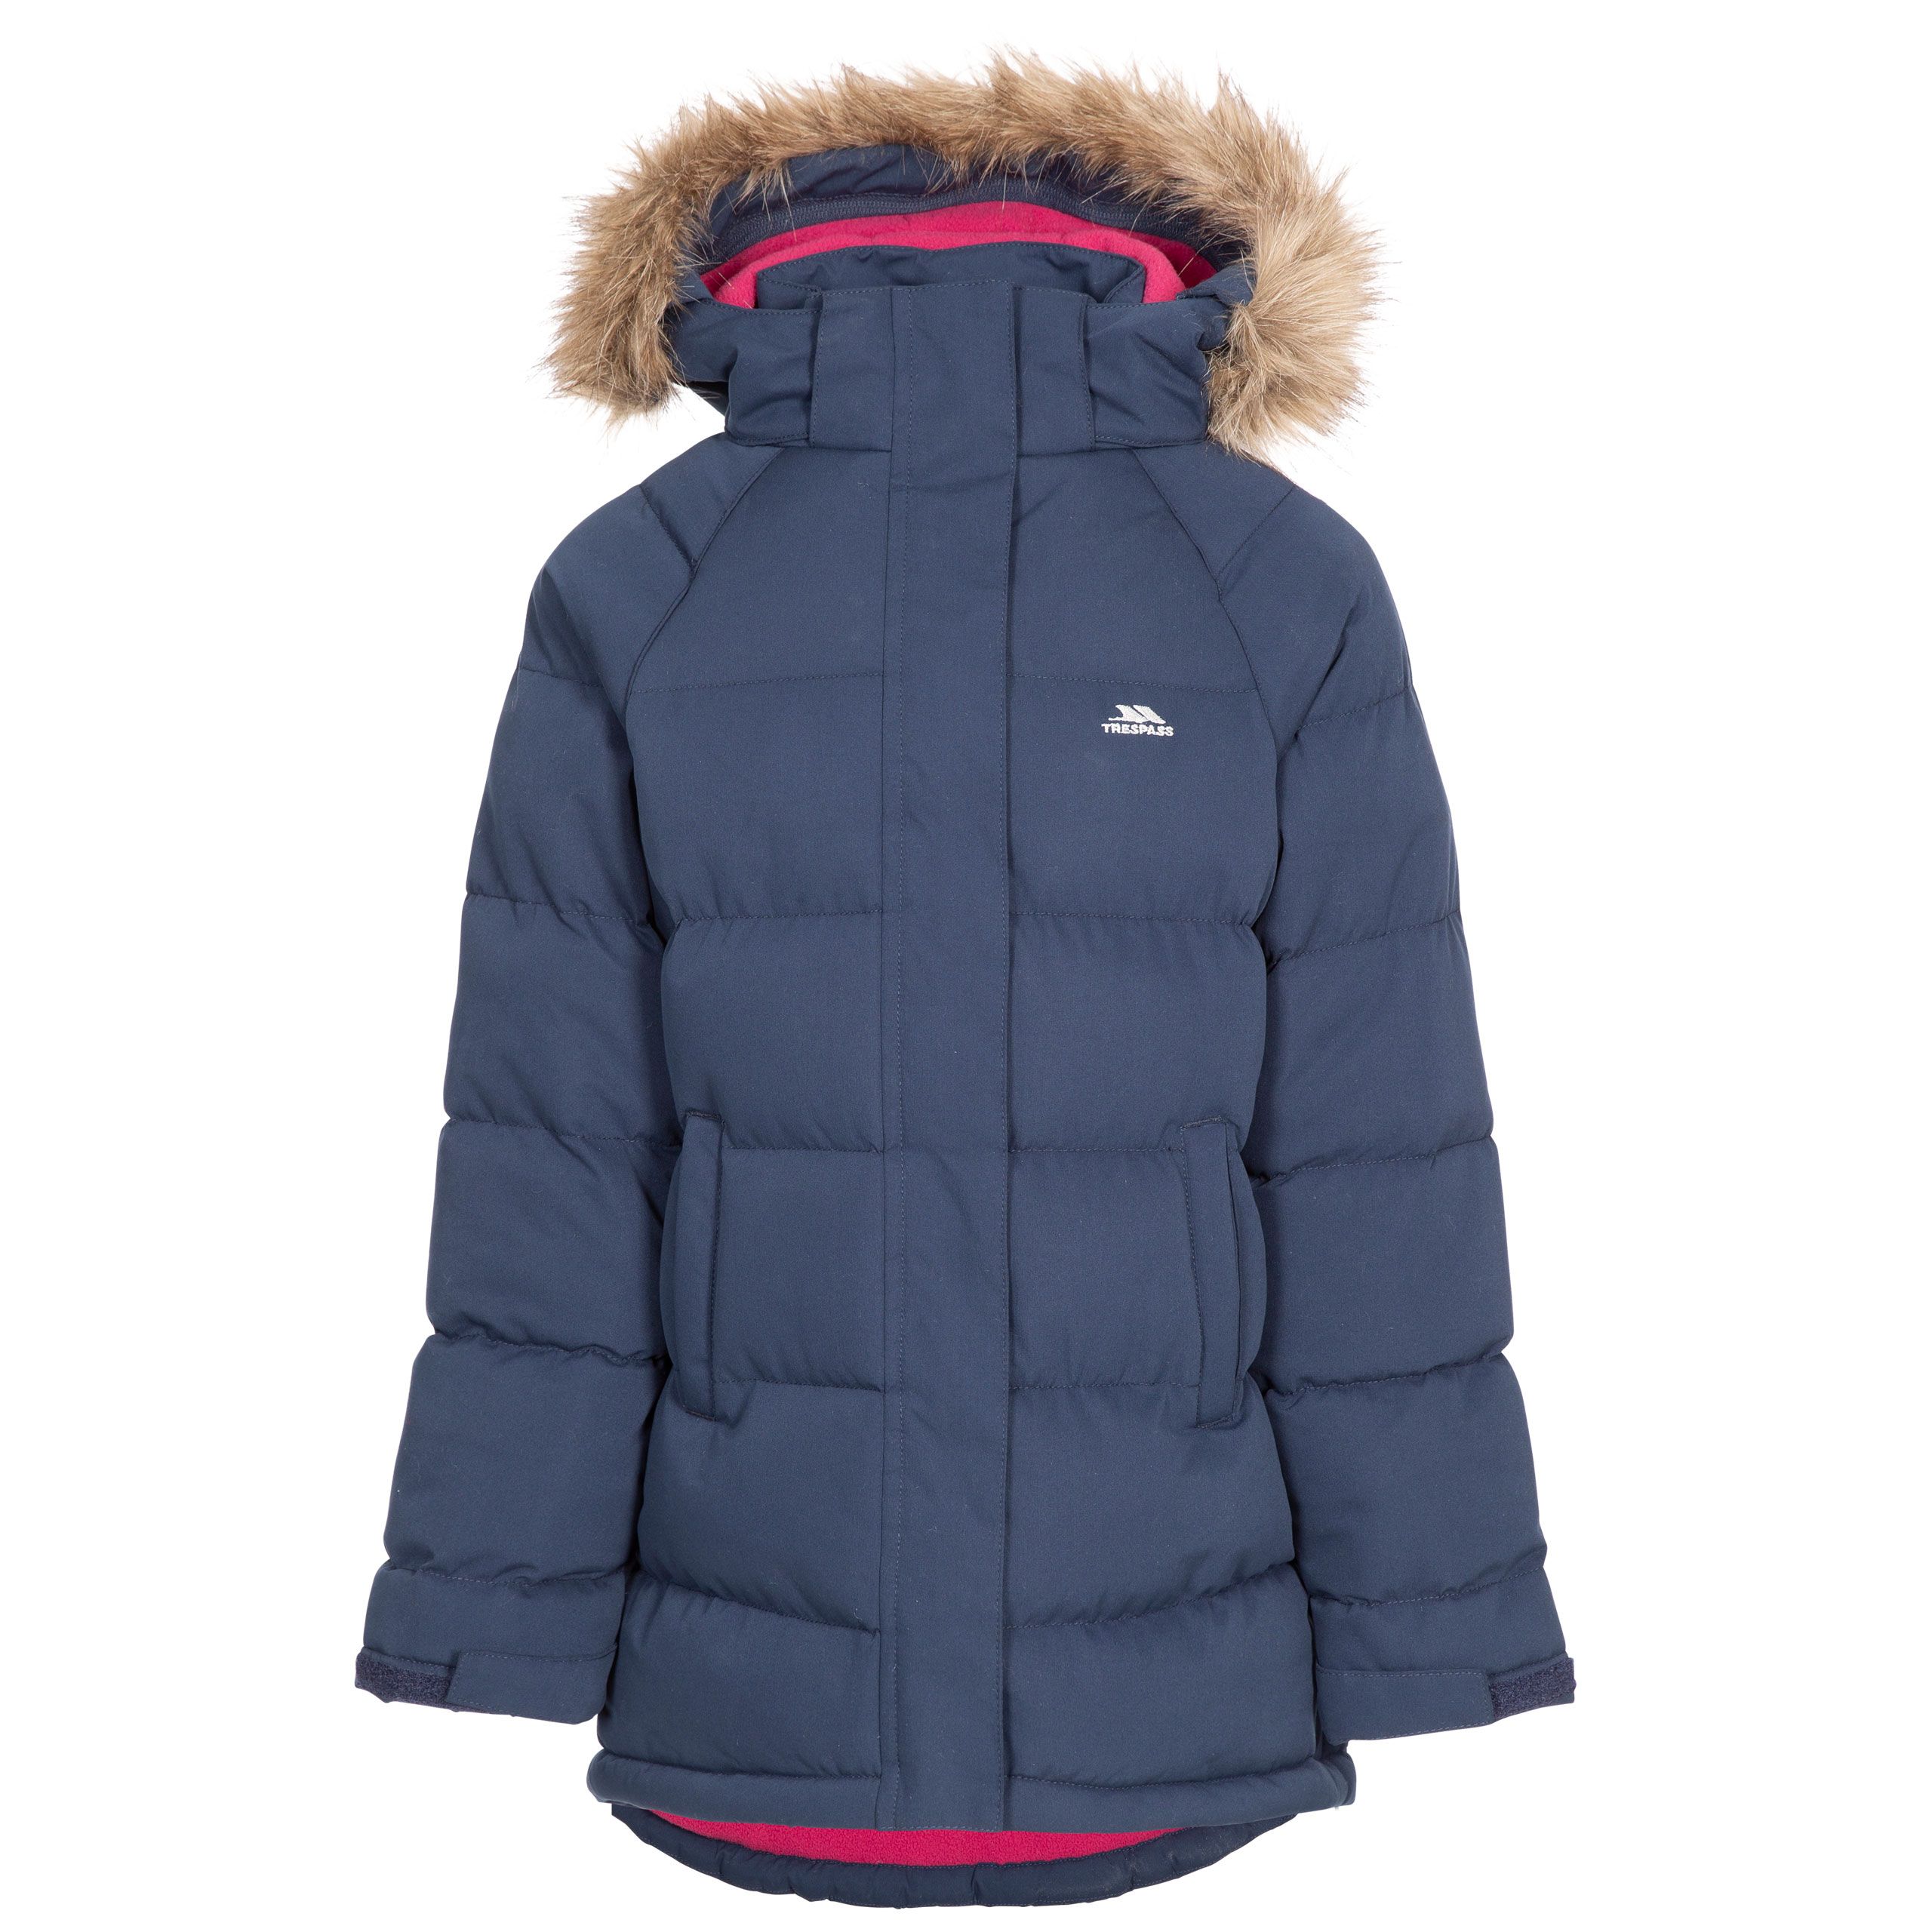 Unique Kids Water Resistant Padded Jacket